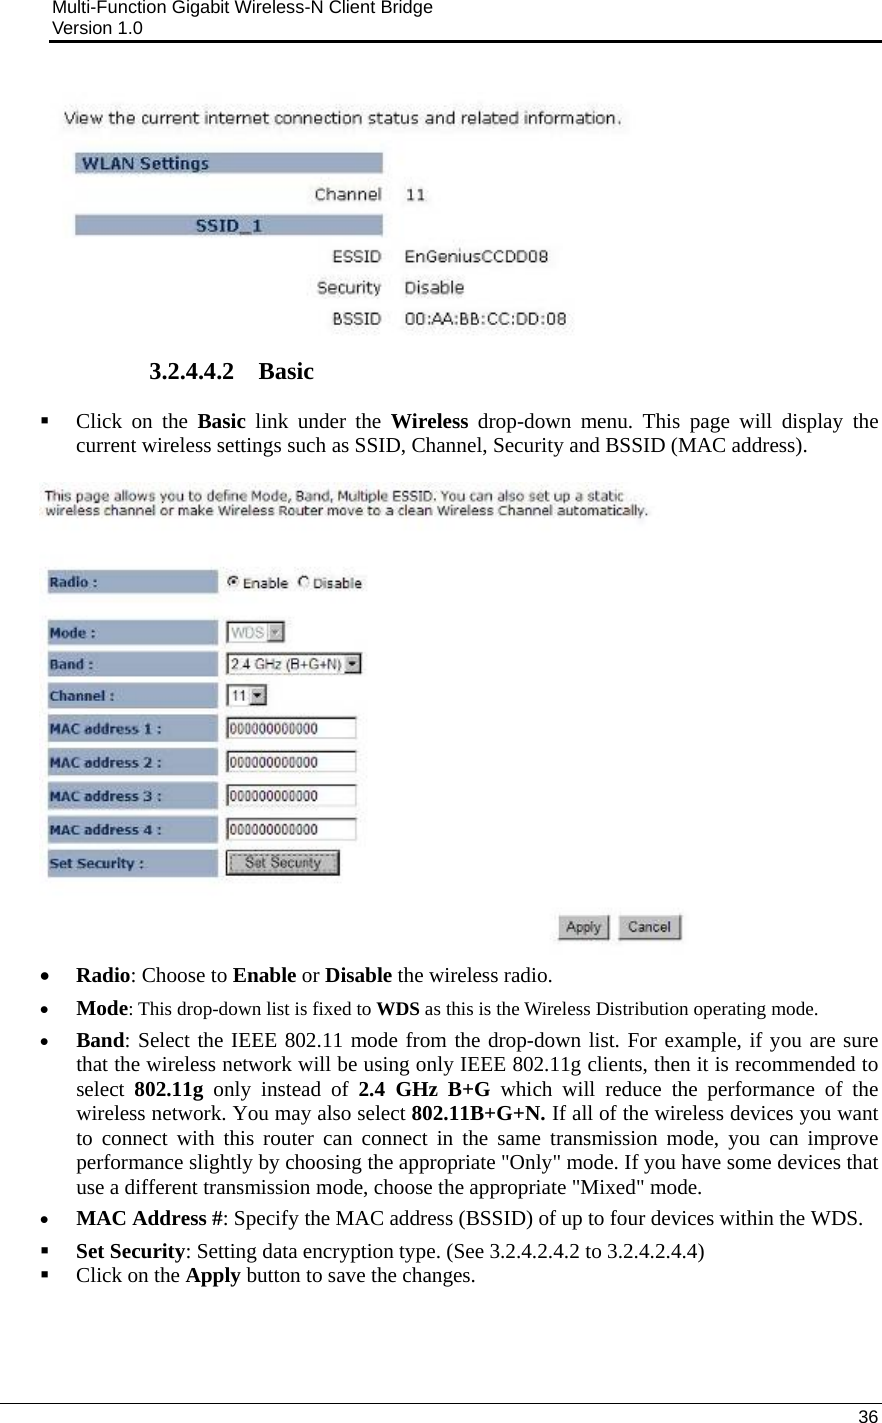 Multi-Function Gigabit Wireless-N Client Bridge                                         Version 1.0    36   3.2.4.4.2 Basic   Click on the Basic link under the Wireless drop-down menu. This page will display the current wireless settings such as SSID, Channel, Security and BSSID (MAC address).   • Radio: Choose to Enable or Disable the wireless radio.  • Mode: This drop-down list is fixed to WDS as this is the Wireless Distribution operating mode. • Band: Select the IEEE 802.11 mode from the drop-down list. For example, if you are sure that the wireless network will be using only IEEE 802.11g clients, then it is recommended to select  802.11g only instead of 2.4 GHz B+G which will reduce the performance of the wireless network. You may also select 802.11B+G+N. If all of the wireless devices you want to connect with this router can connect in the same transmission mode, you can improve performance slightly by choosing the appropriate &quot;Only&quot; mode. If you have some devices that use a different transmission mode, choose the appropriate &quot;Mixed&quot; mode.  • MAC Address #: Specify the MAC address (BSSID) of up to four devices within the WDS.   Set Security: Setting data encryption type. (See 3.2.4.2.4.2 to 3.2.4.2.4.4)  Click on the Apply button to save the changes.     